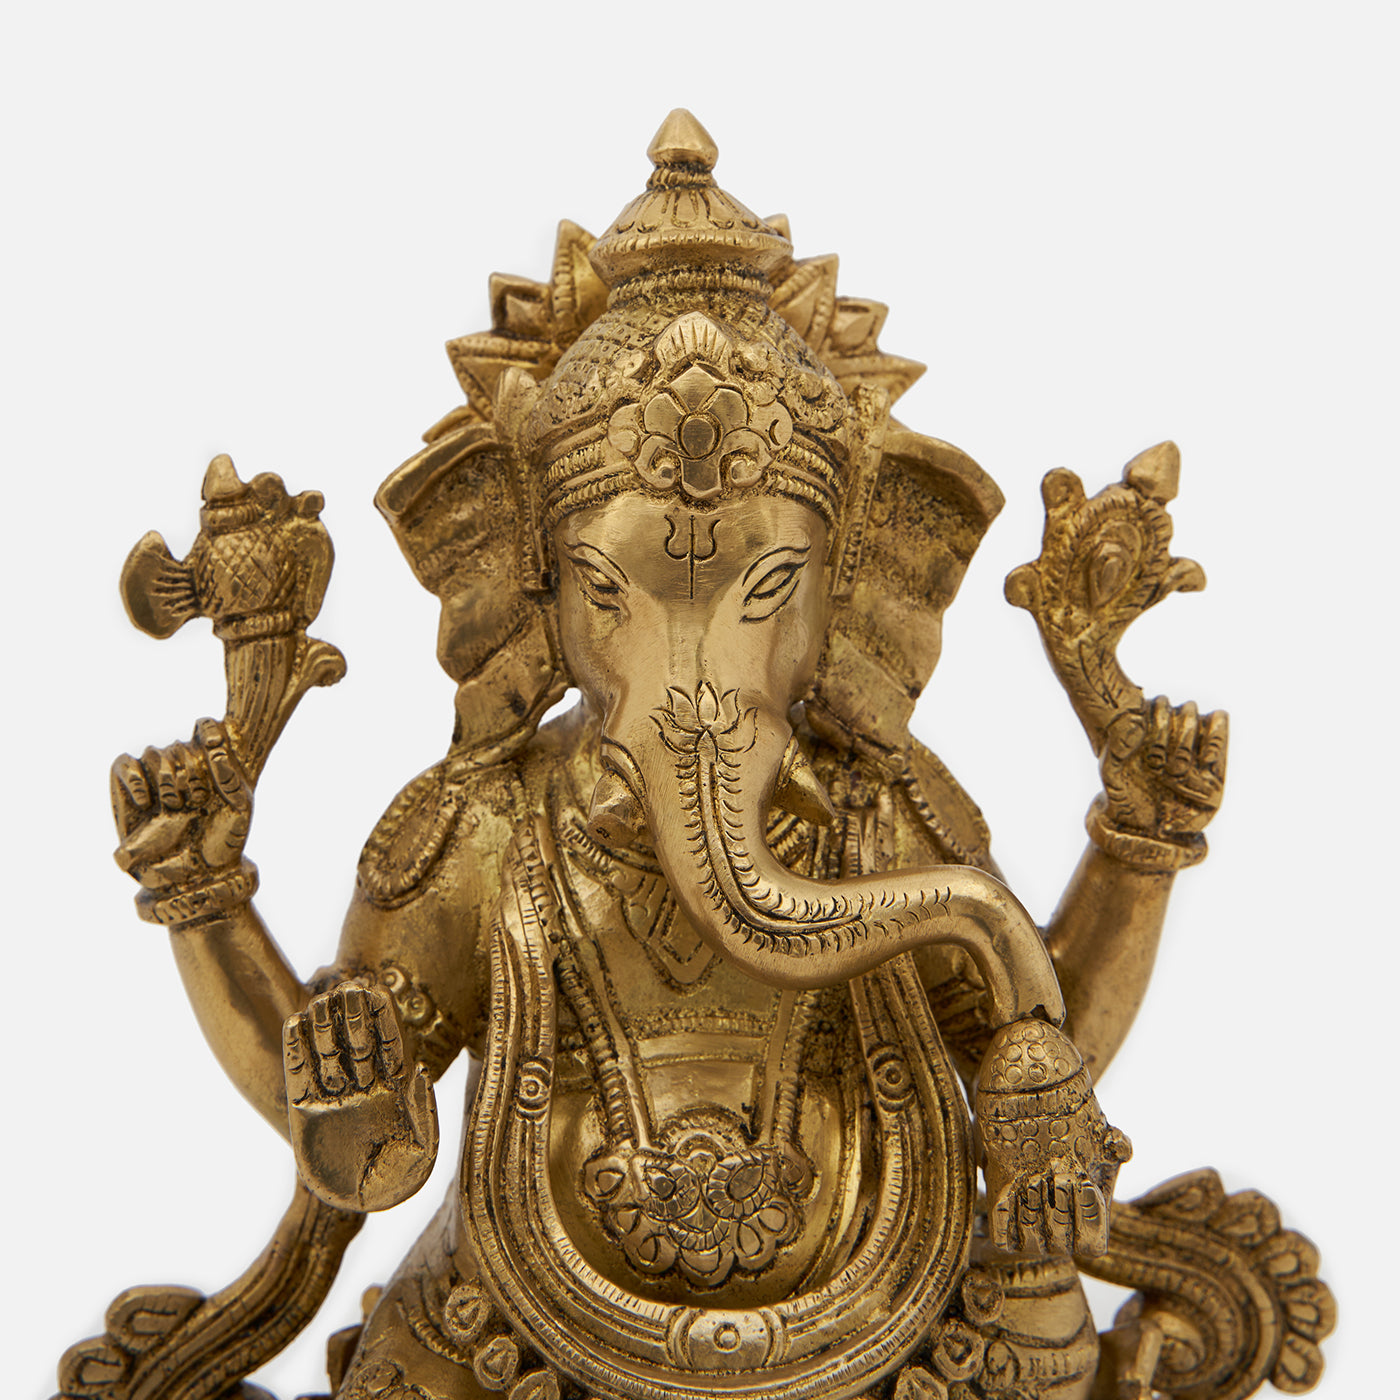 Brass Beautiful Lord Ganesha Statue/Idol For Home Temple & Office